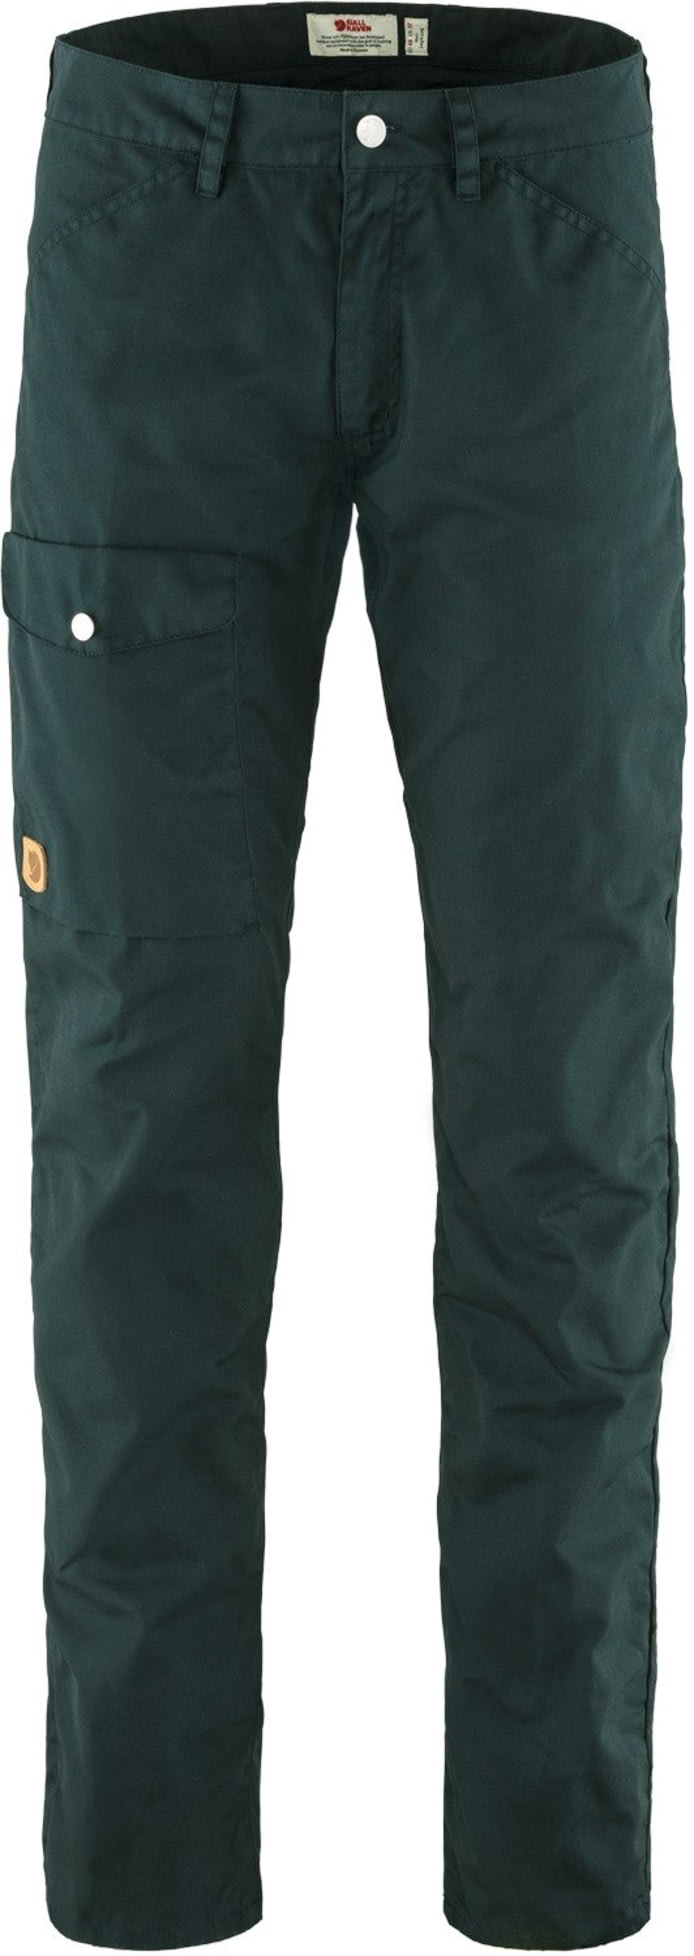 Fjallraven Greenland Jeans - Men's with Free S&H â CampSaver